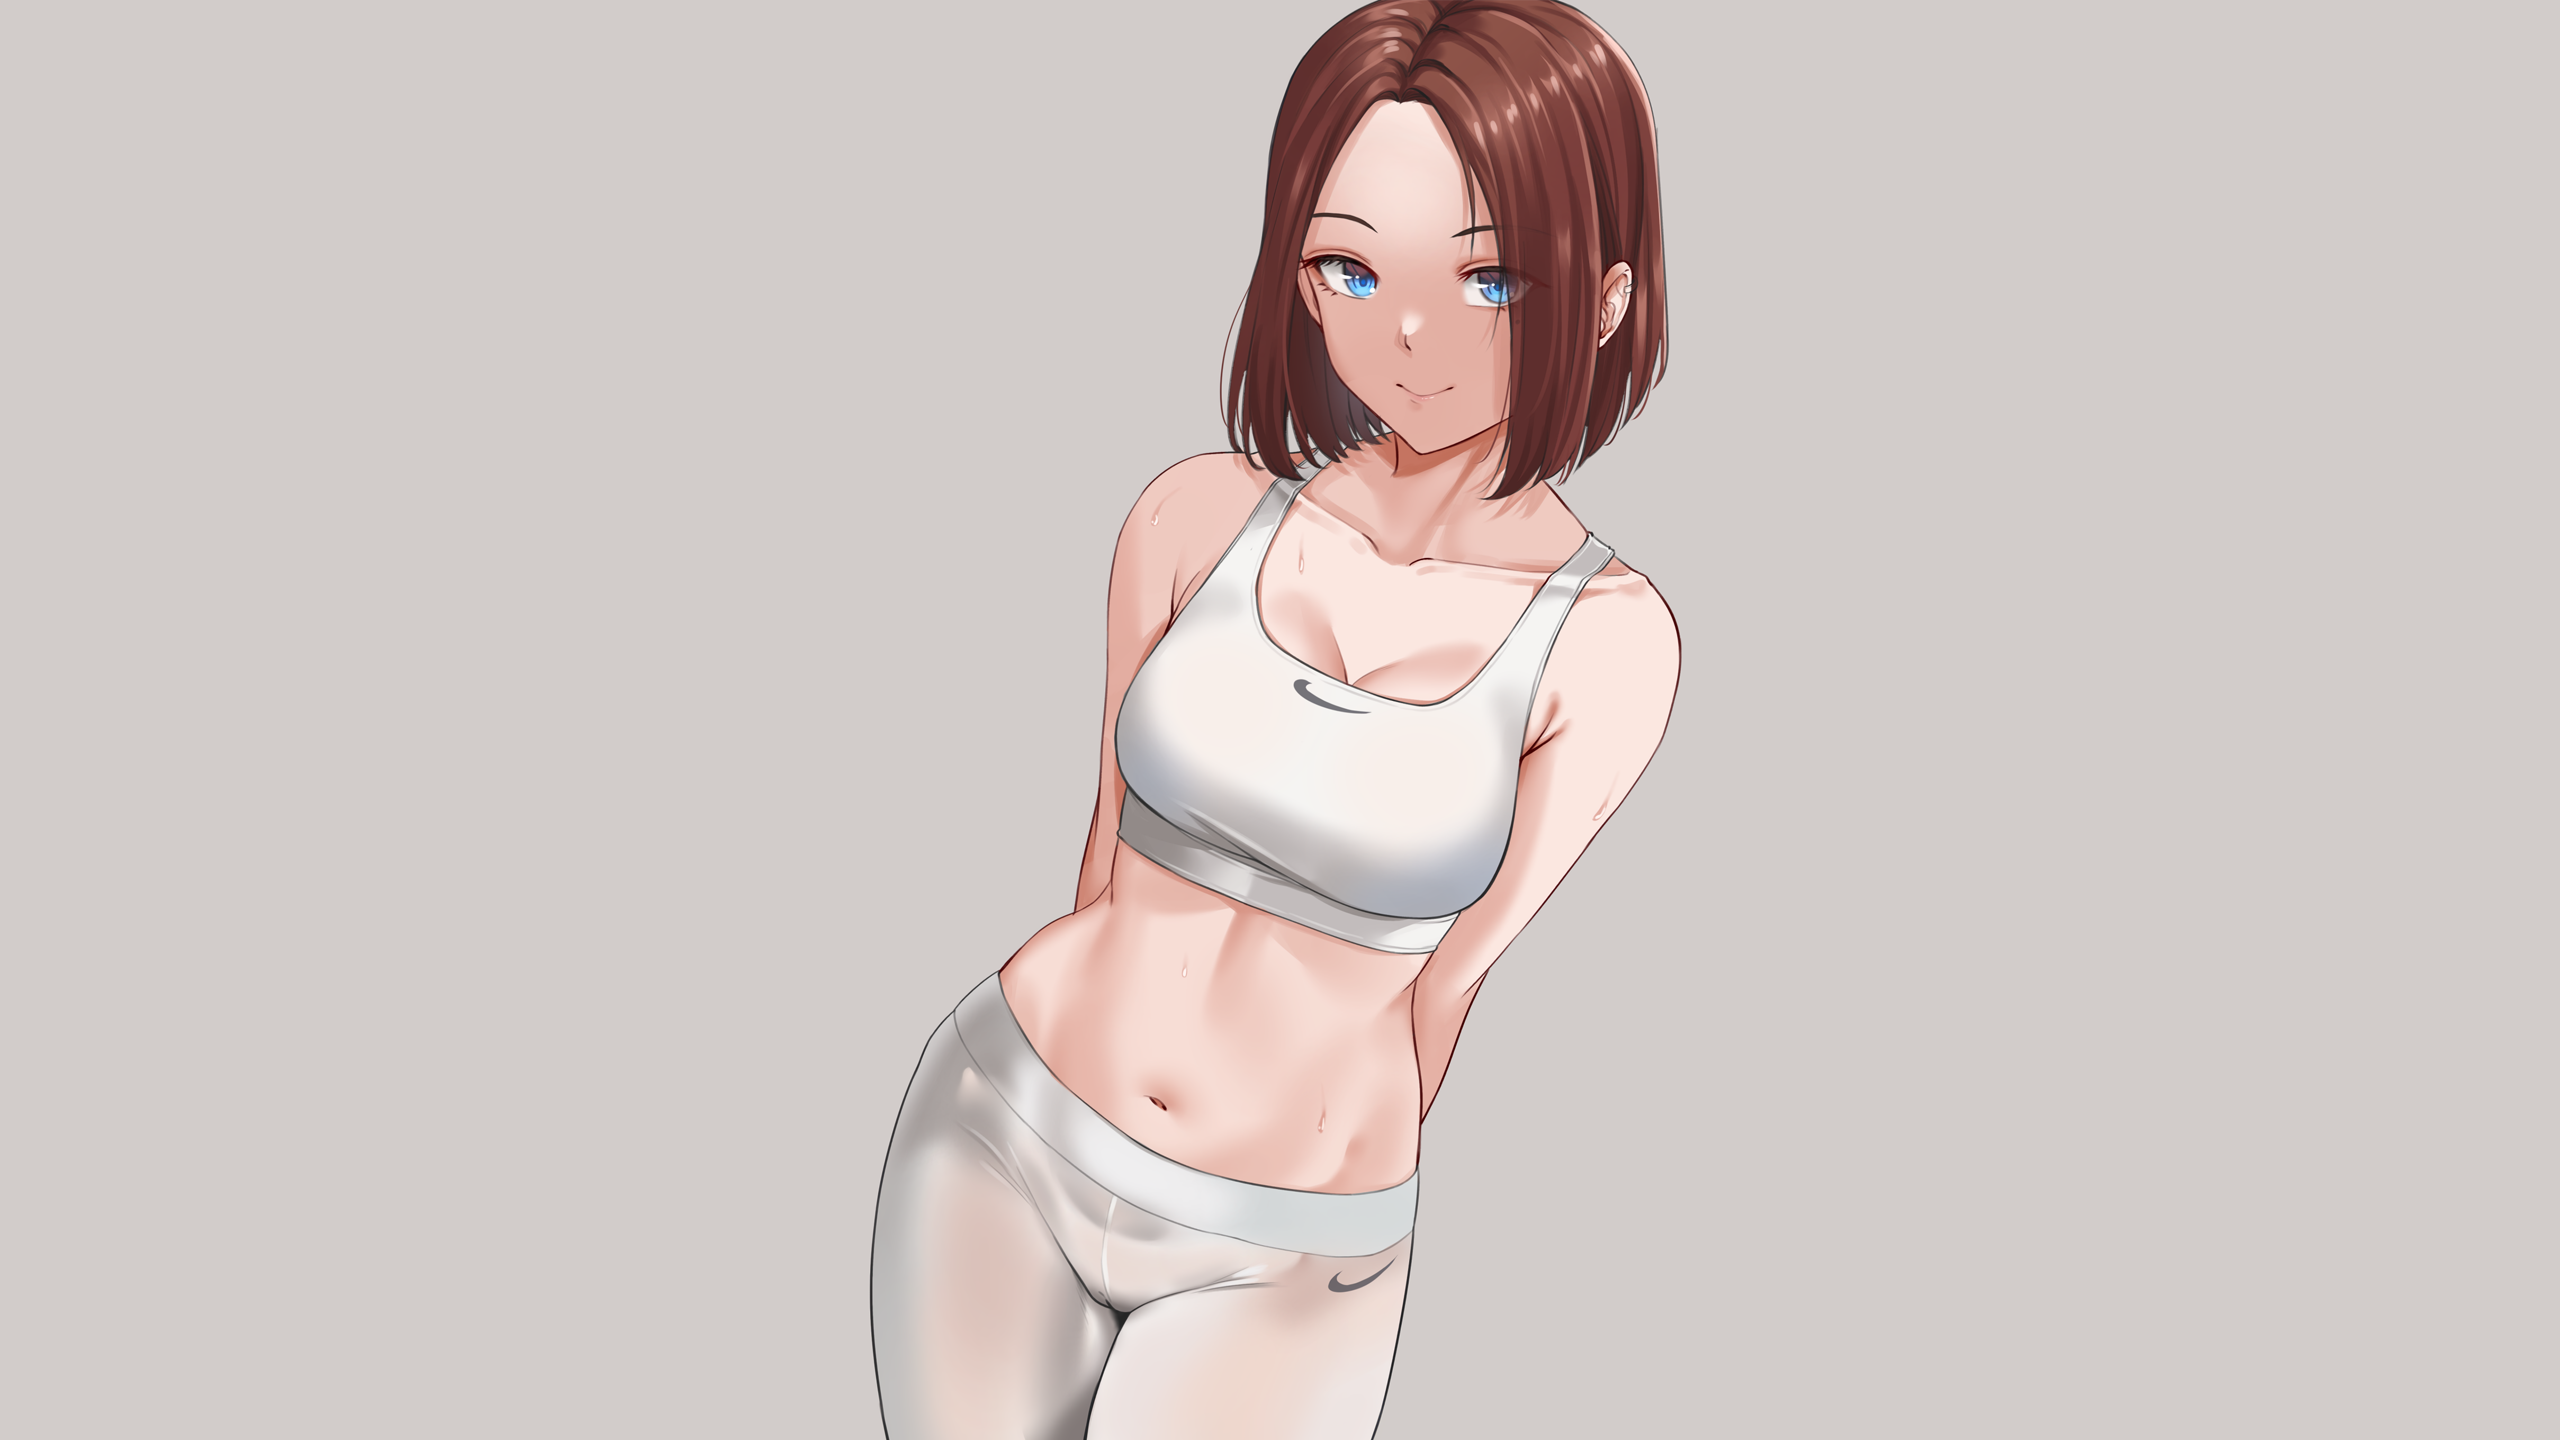 Anime 2560x1440 anime anime girls Sam (Samsung virtual assistant) short hair simple background sports bra yoga pants belly belly button sportswear thighs sweaty body tight clothing Ryudraw gray background cleavage smiling looking at viewer